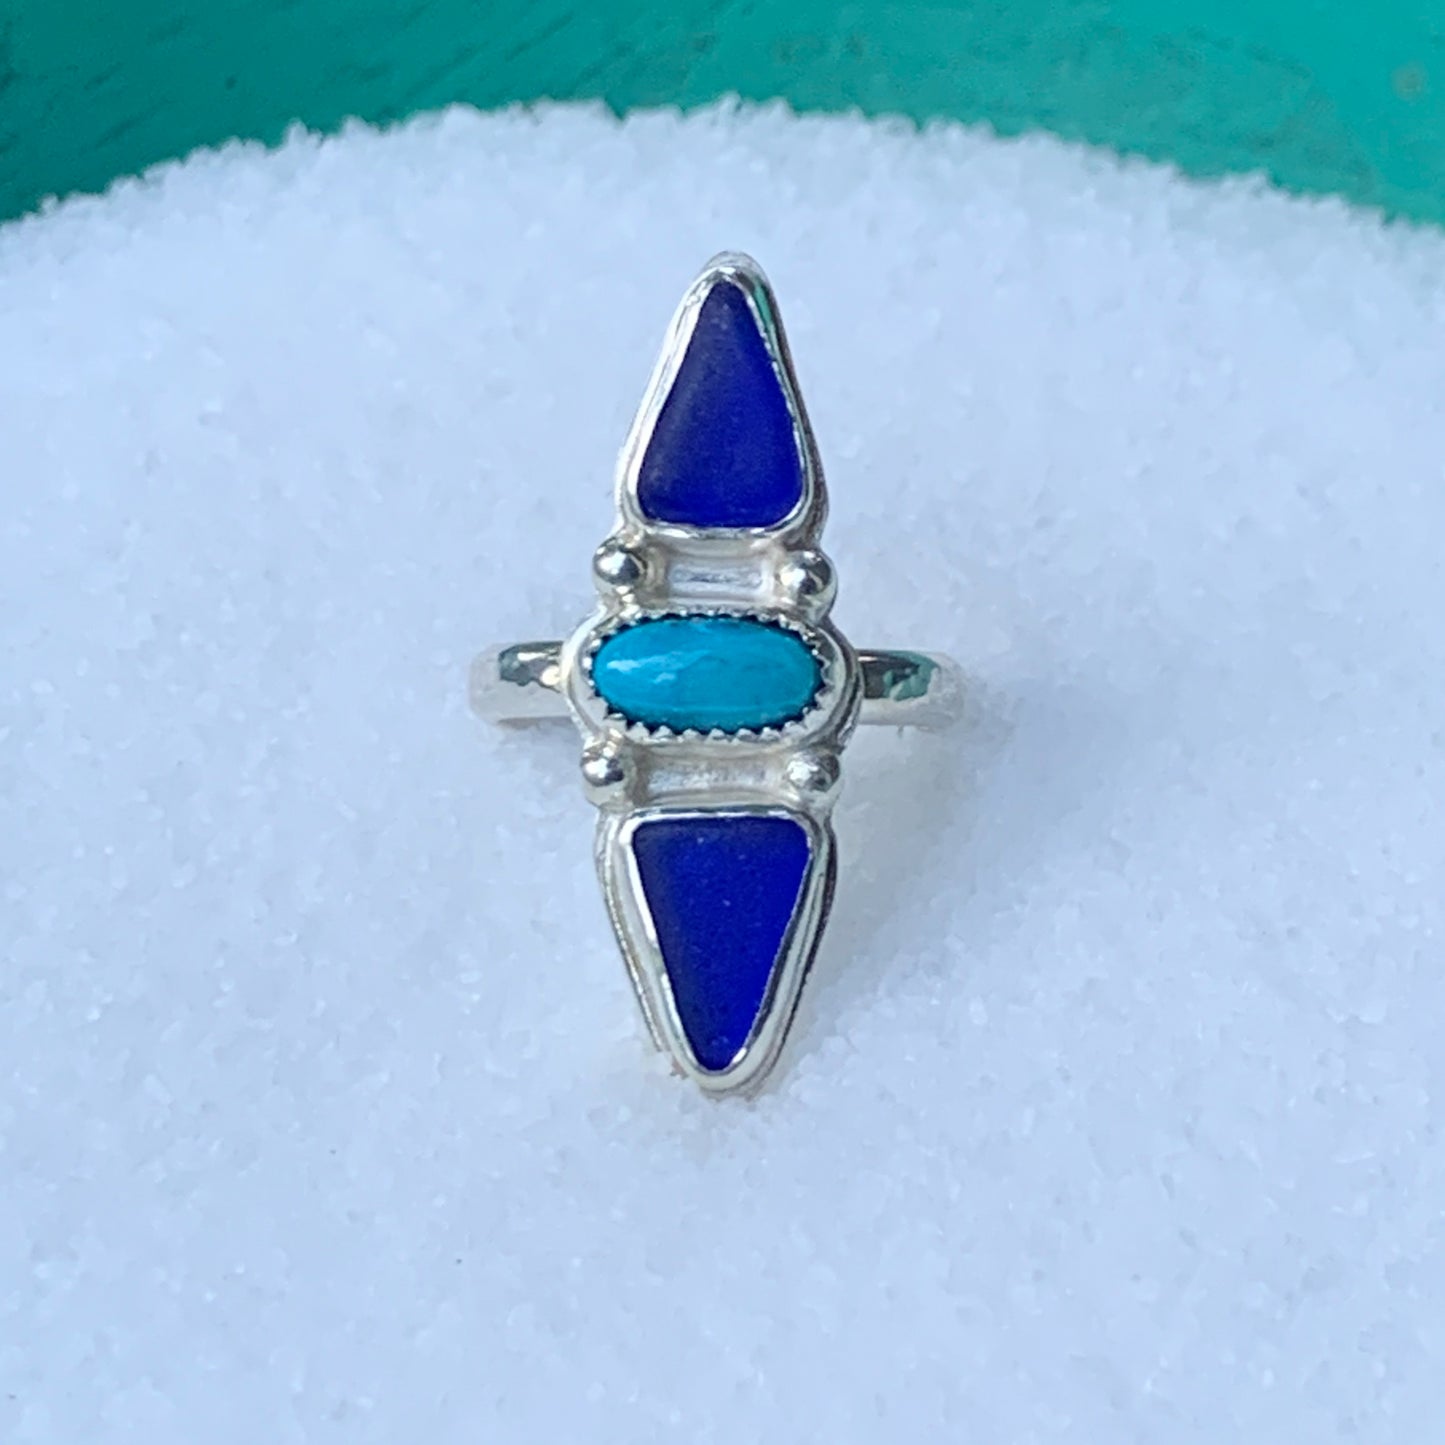 Trio Ring with Turquoise and Seaglass • Size 7